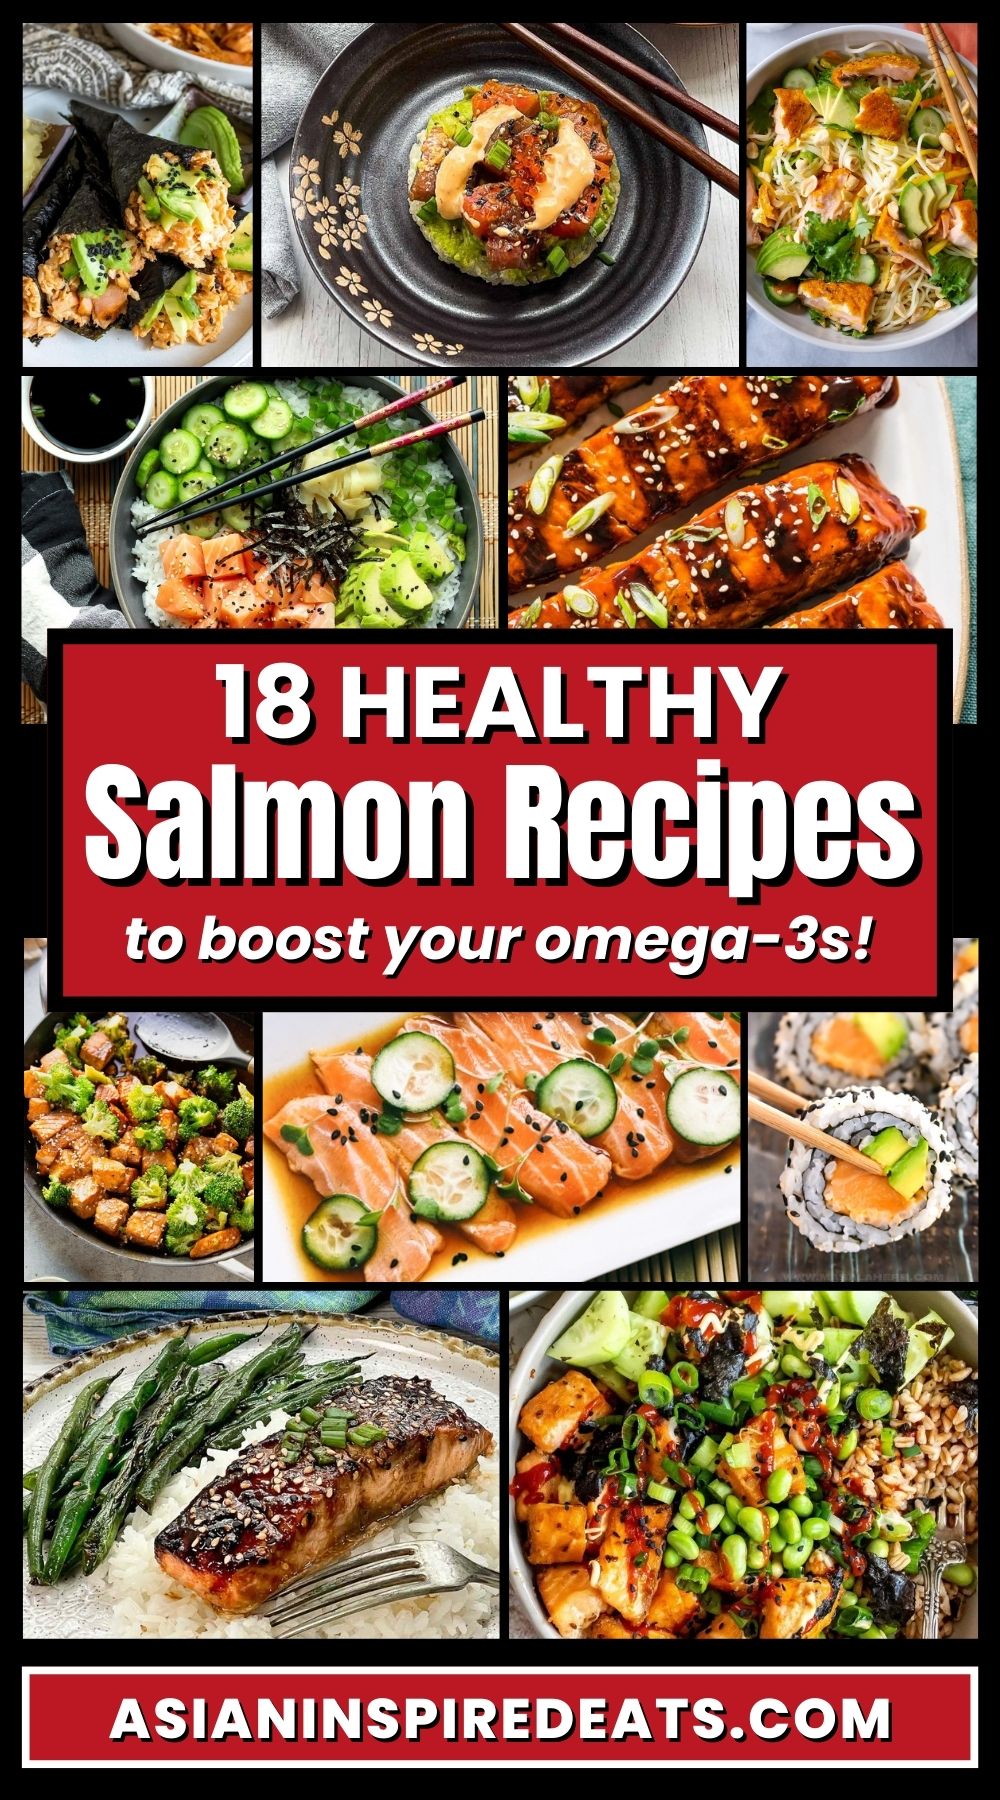 A Pinterest collage of healthy salmon recipes to boost your omega-3s.